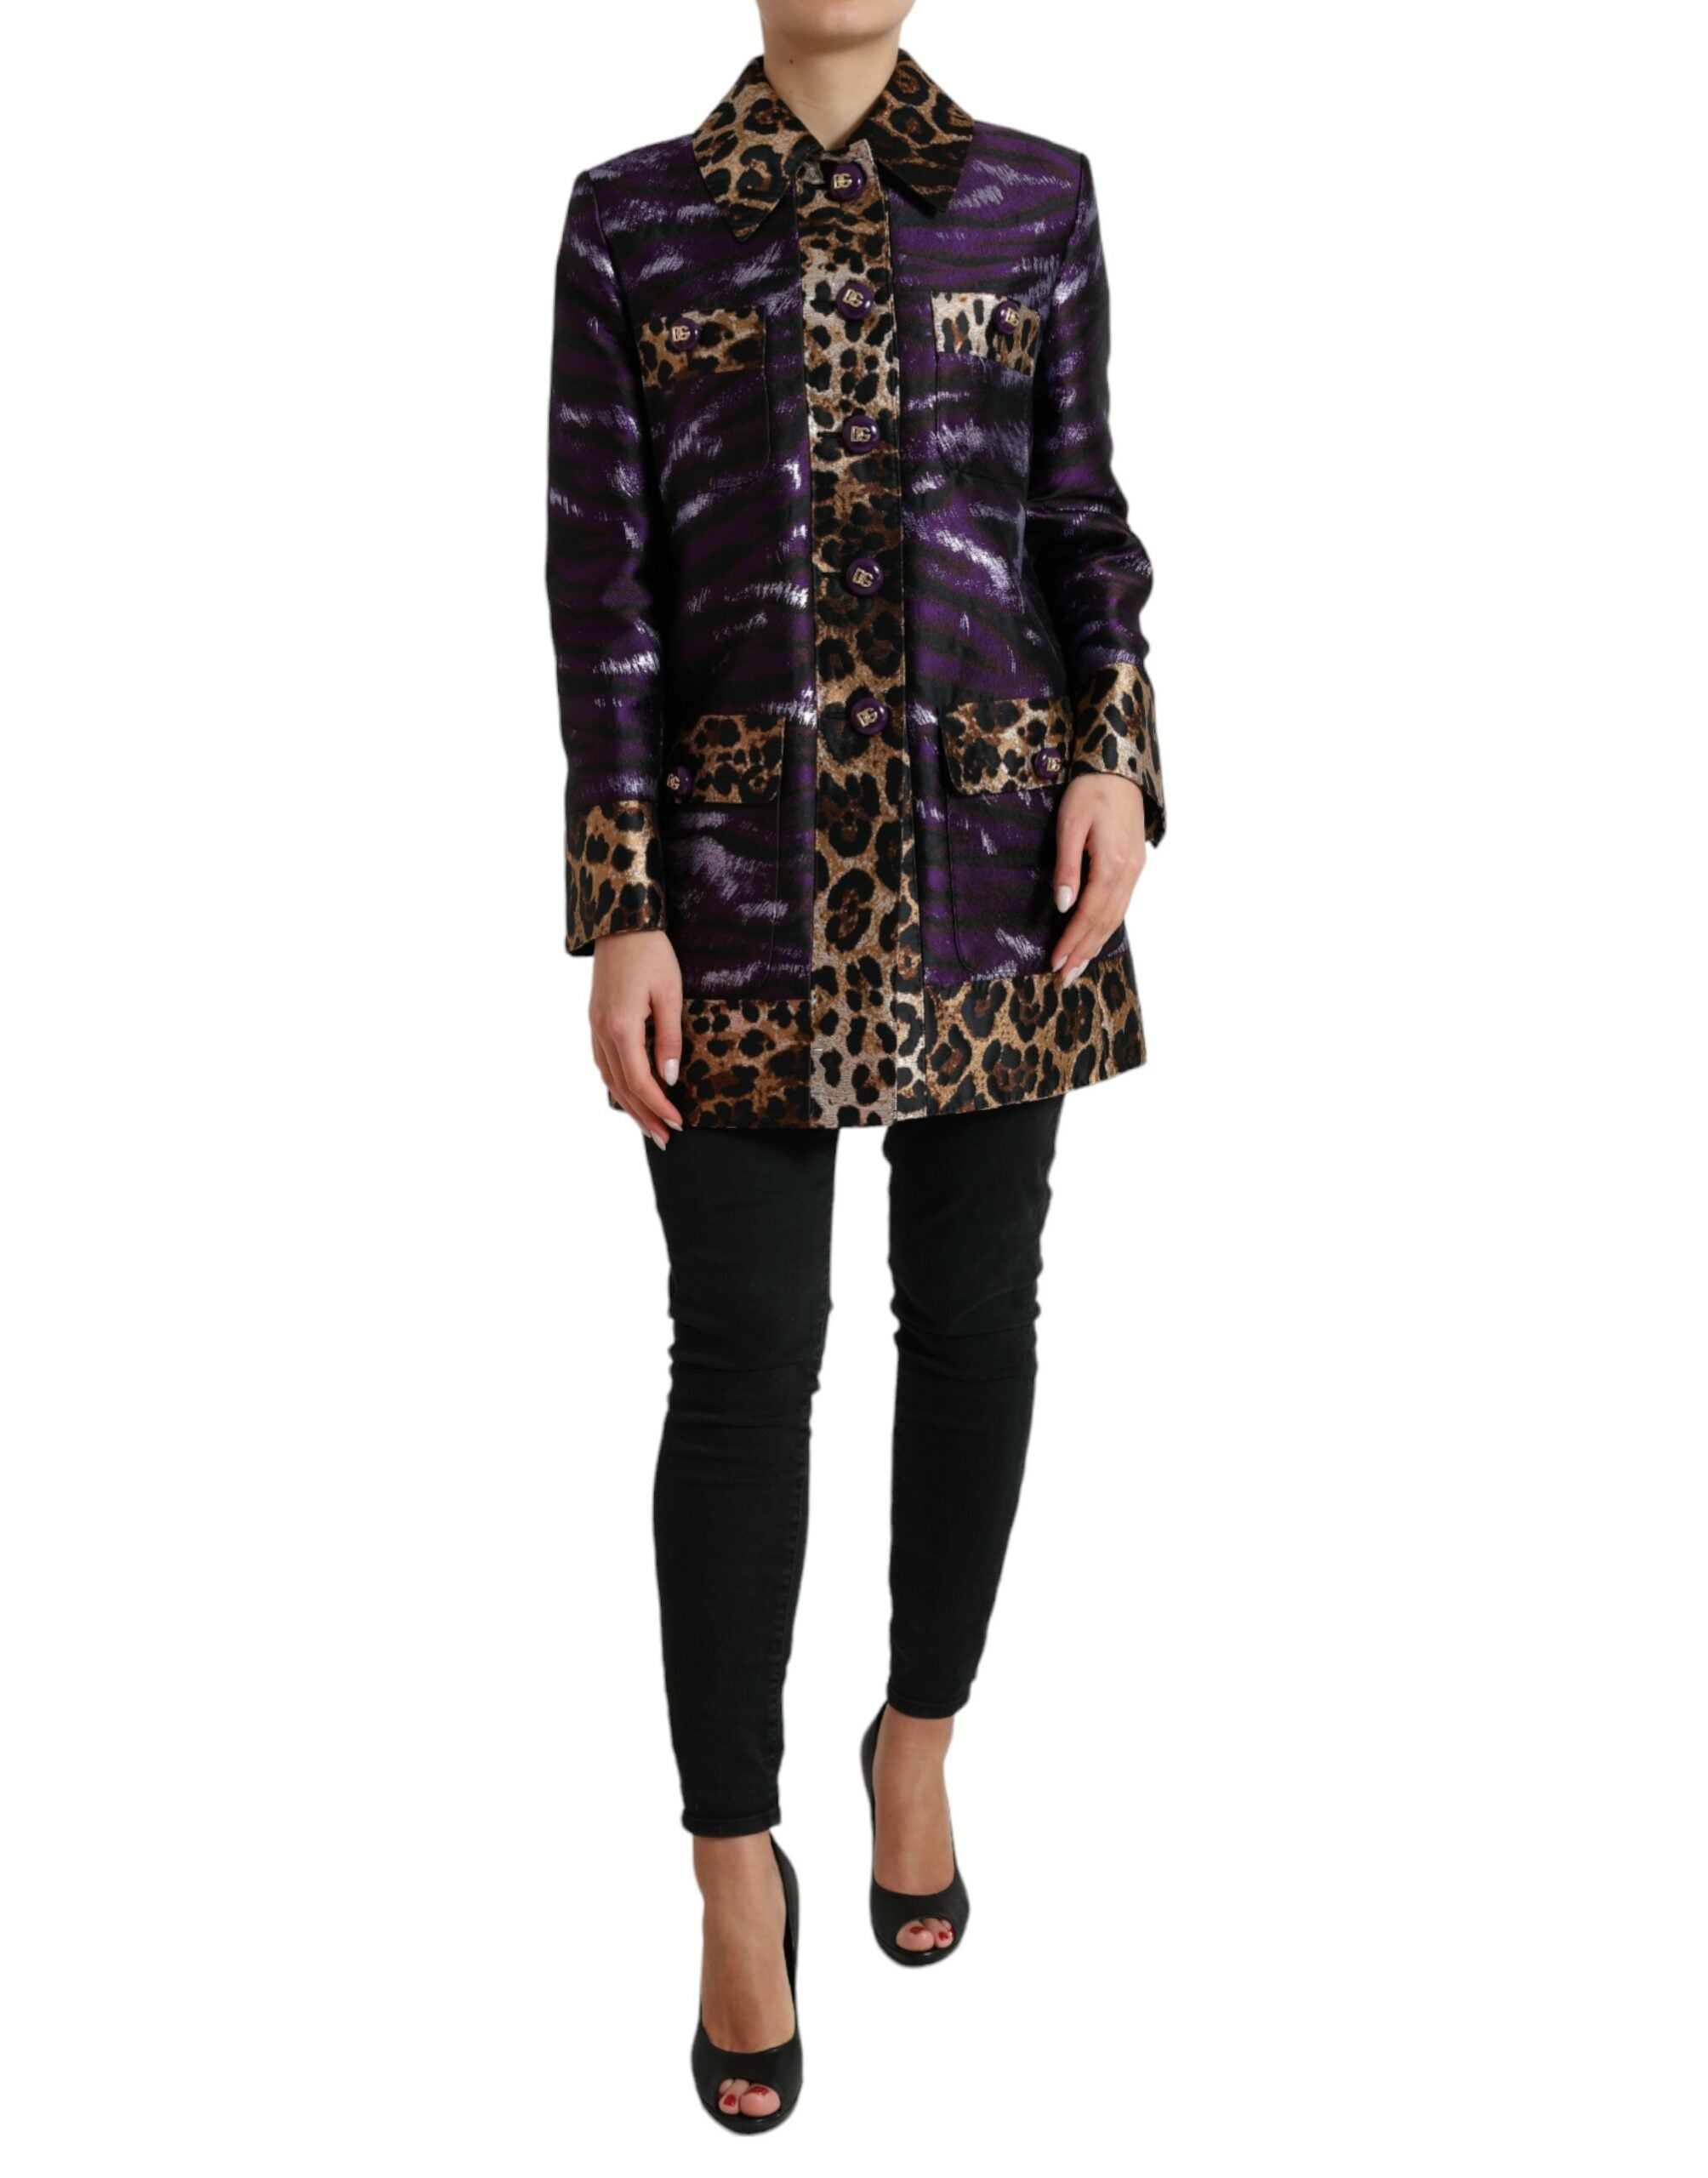 Exquisite Jacquard Trench With Tiger Motif